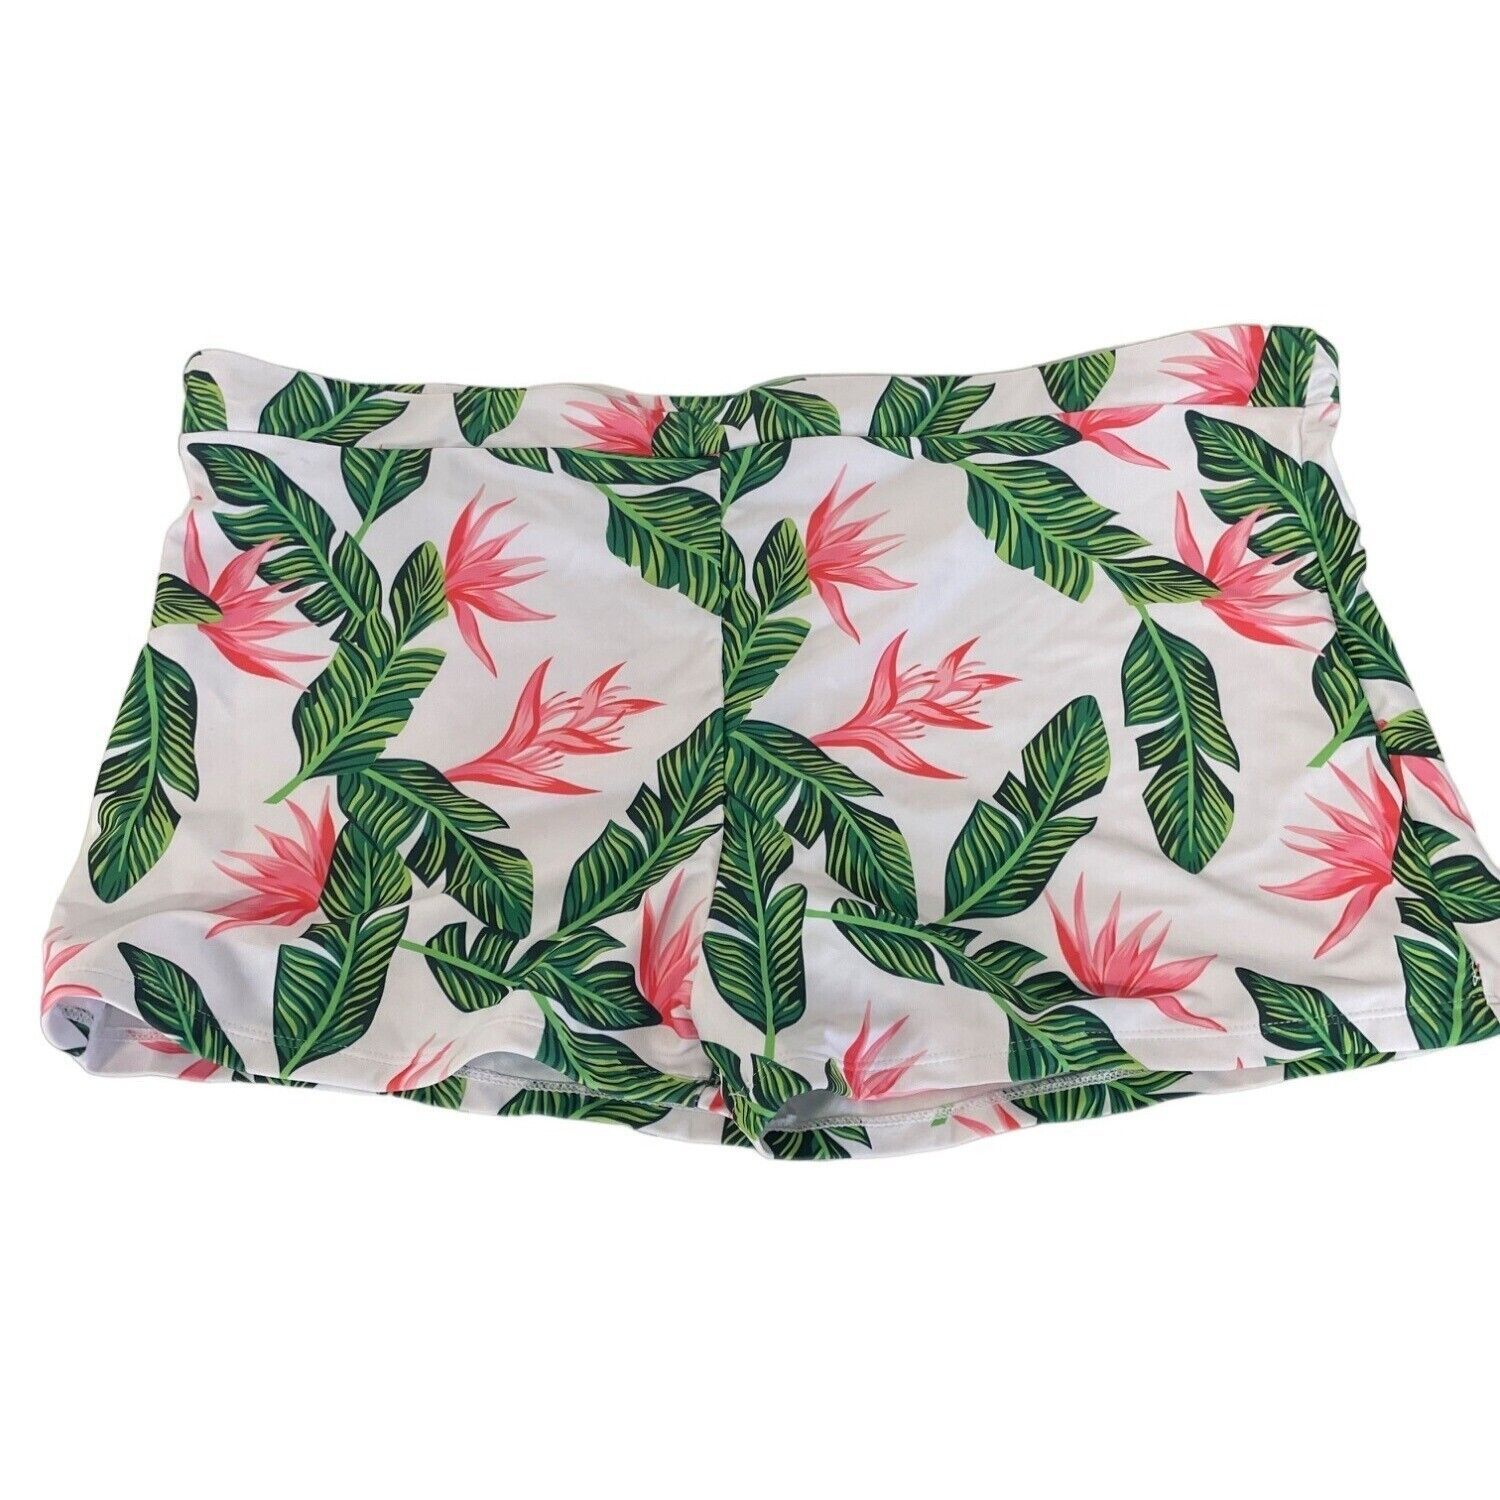 Primary image for SHEIN Swim Shorts Bottoms Tropical Leaves Size 5XL